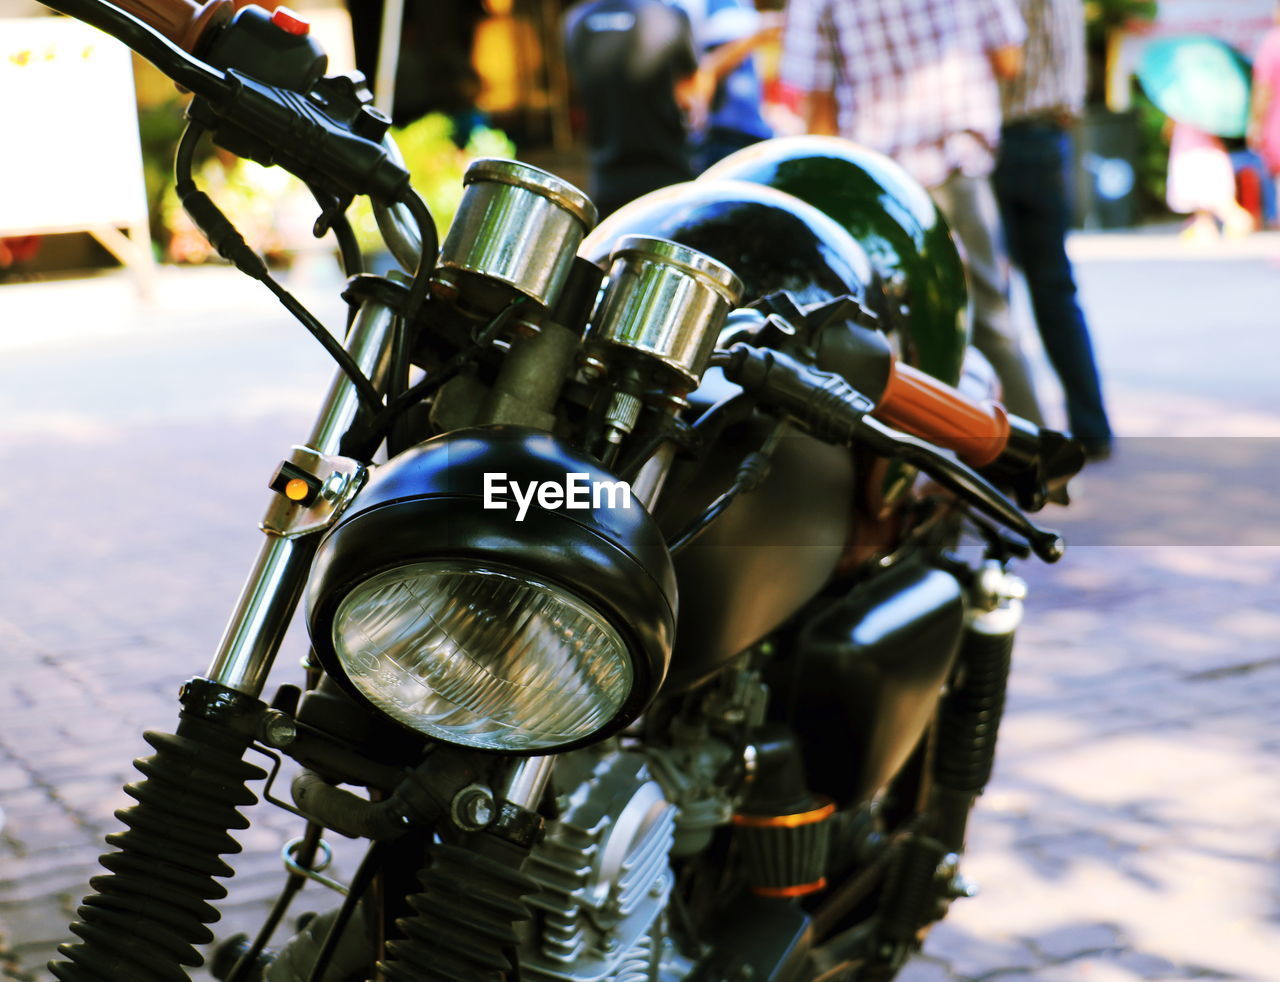 Close-up of motorcycle on street in city